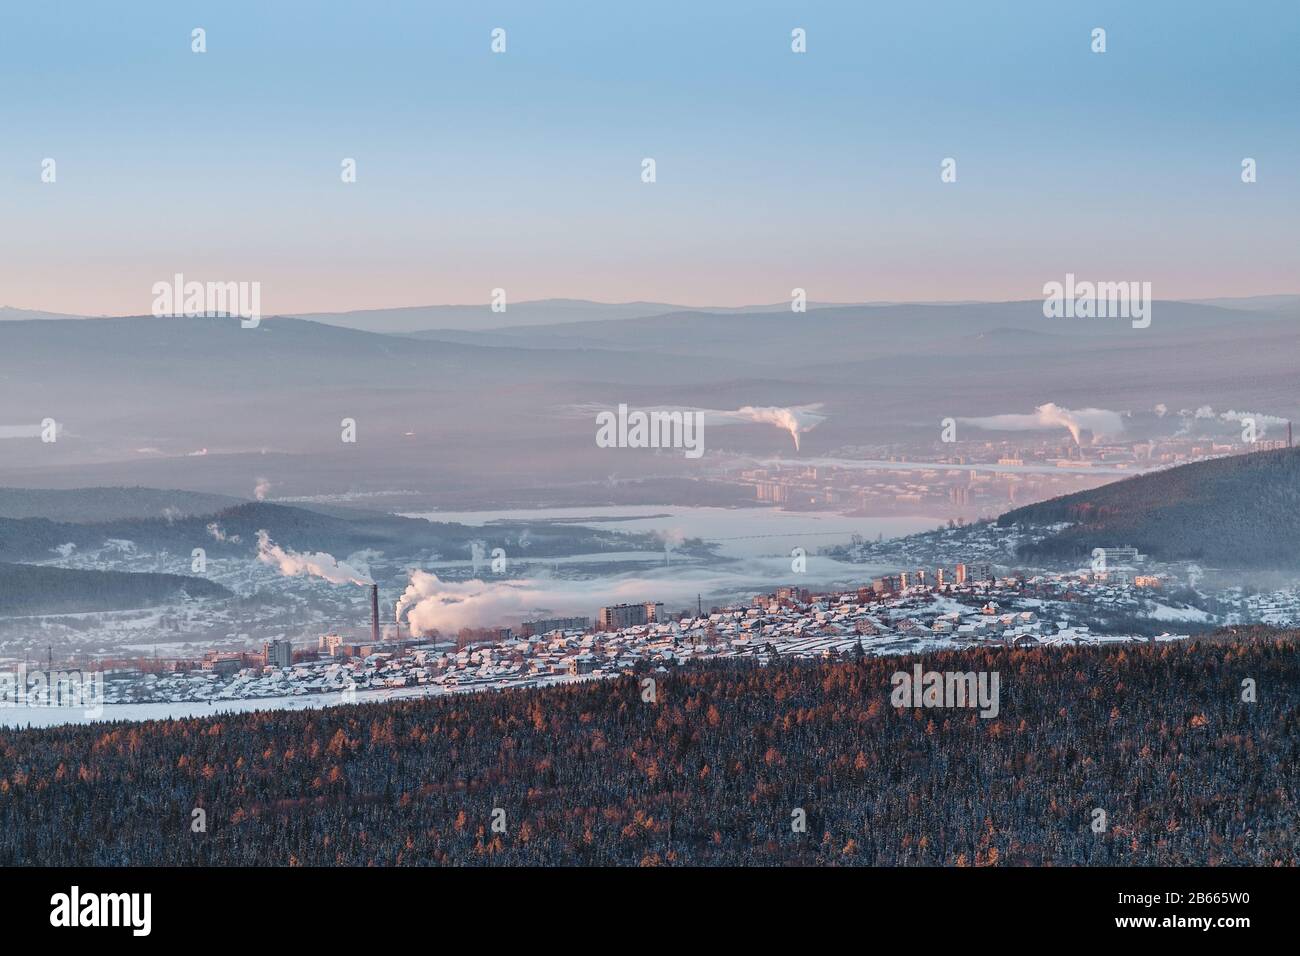 The aerial view of the industrial center of the Urals city of Zlatoust with the pipe smoke from the factories, surrounded by winter mountains. Stock Photo